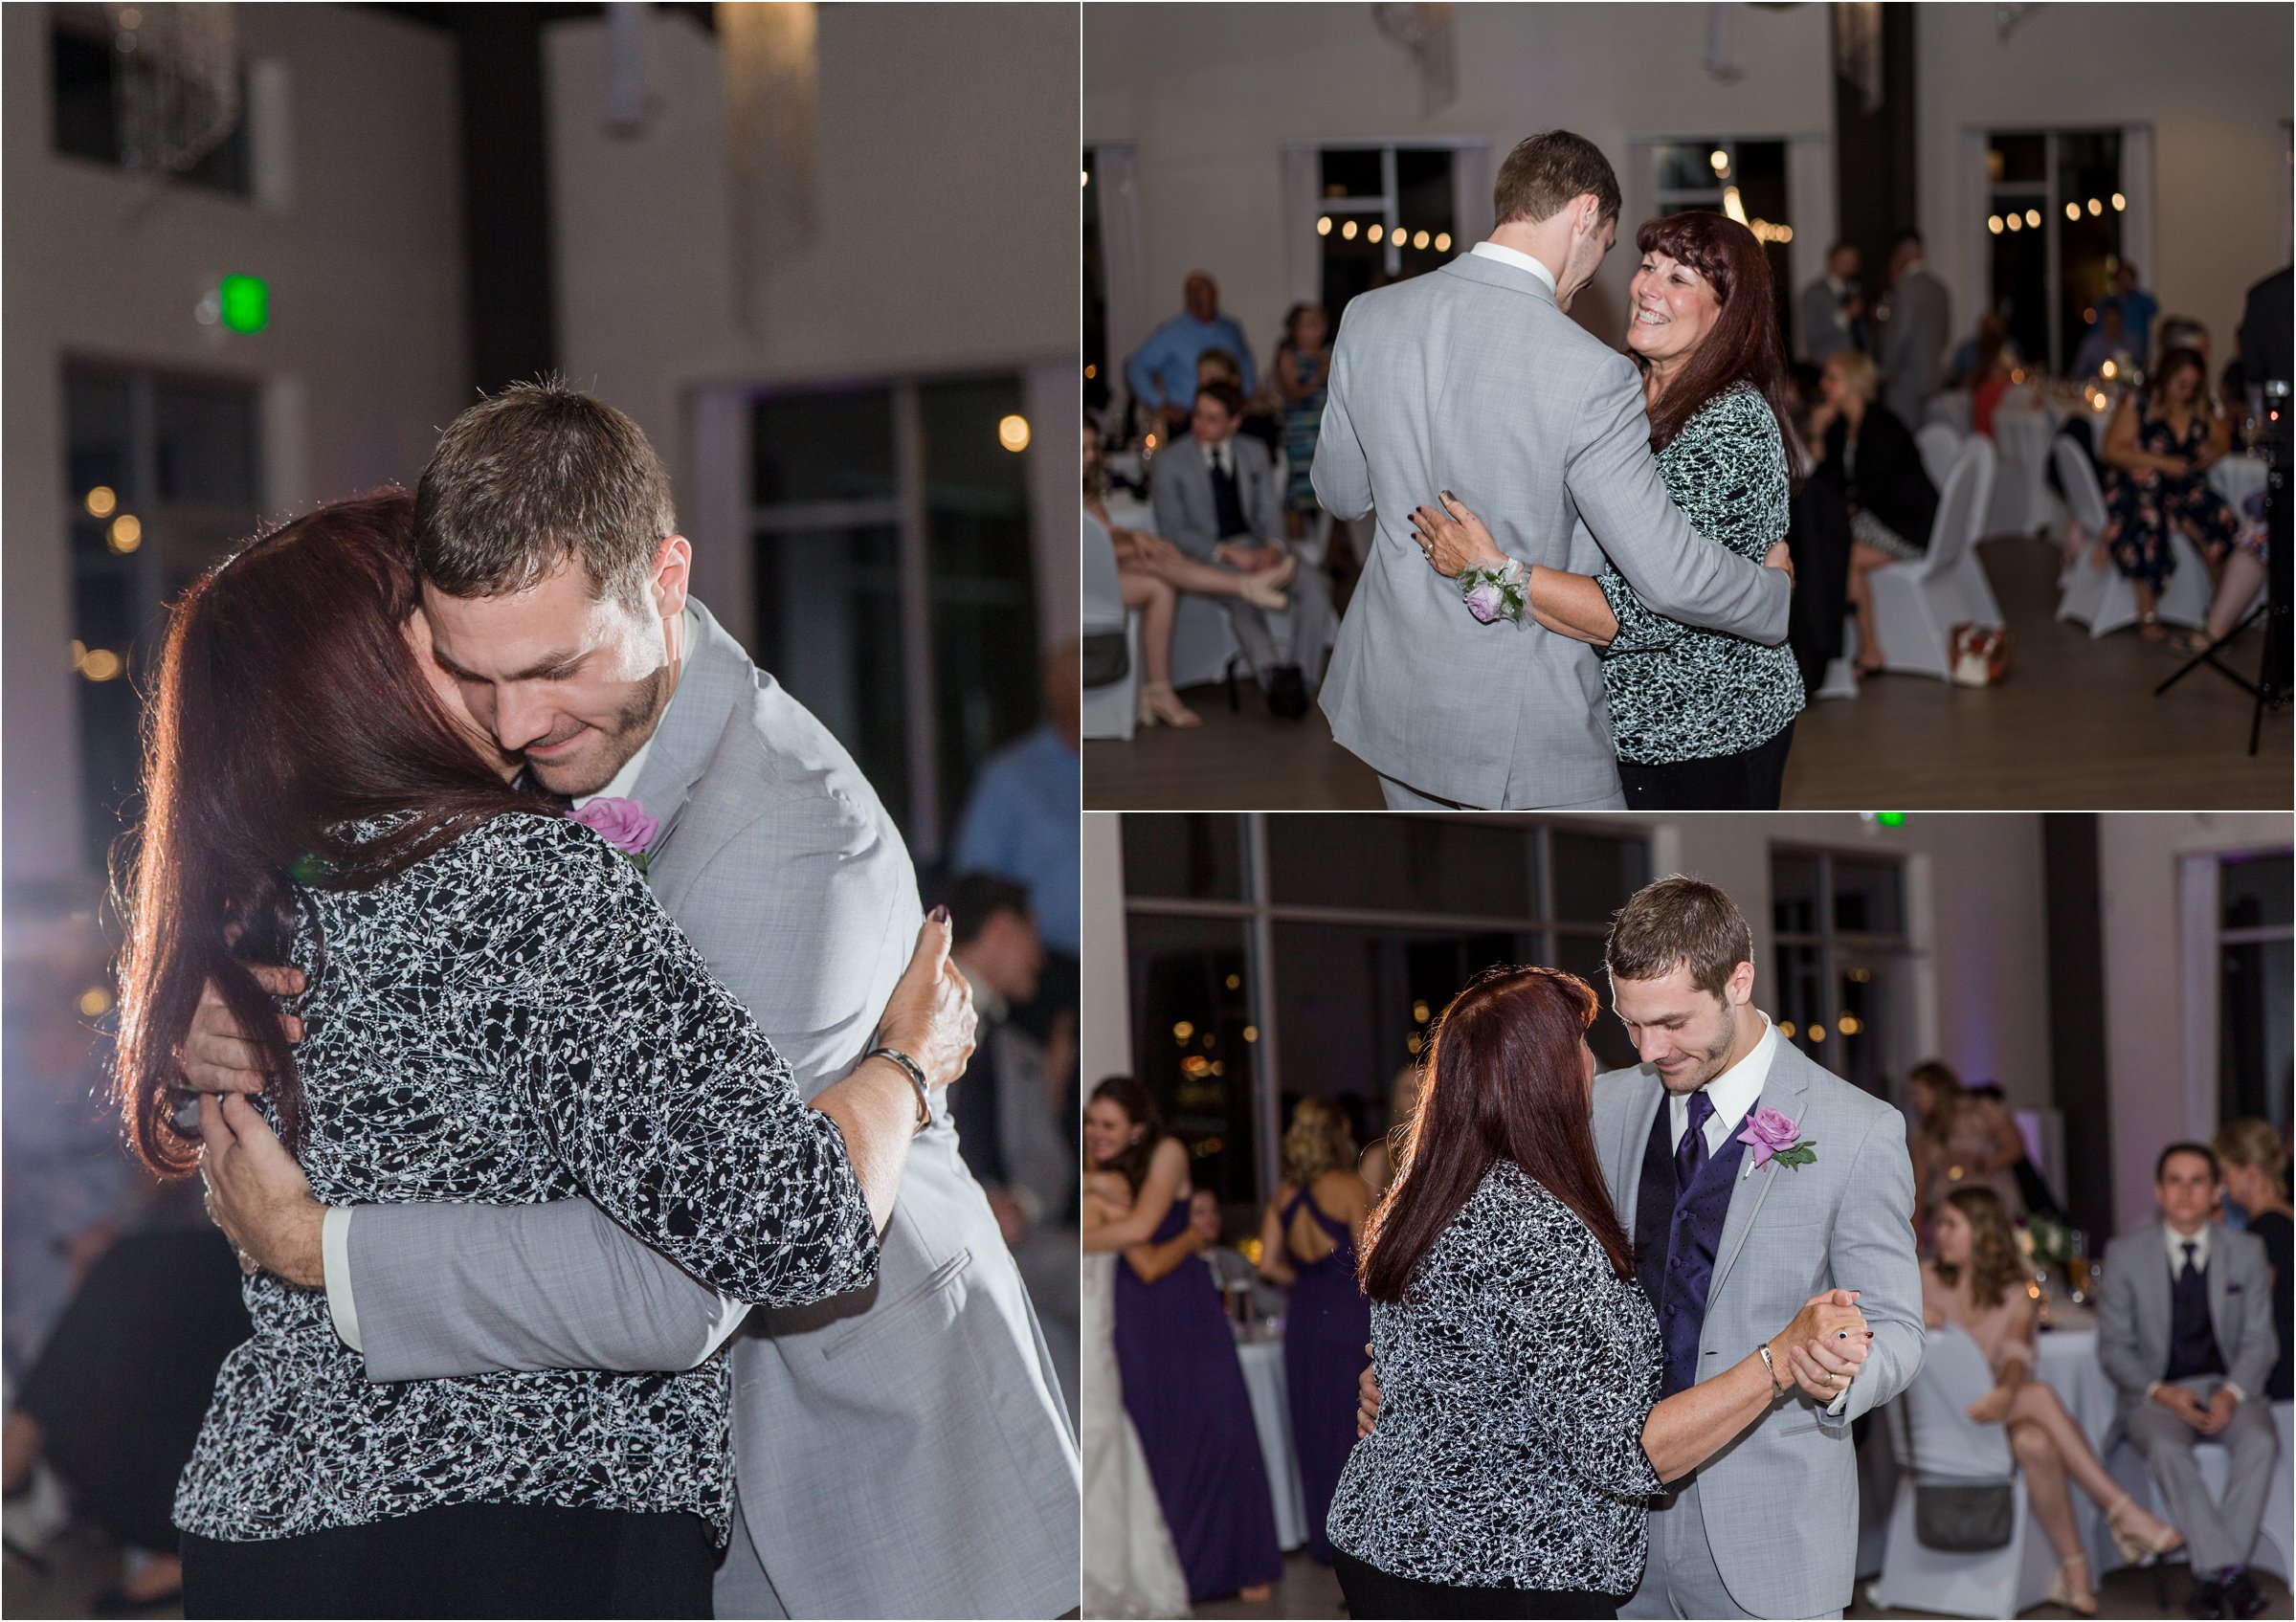 Groom and his mom dance to the mother/son dance together